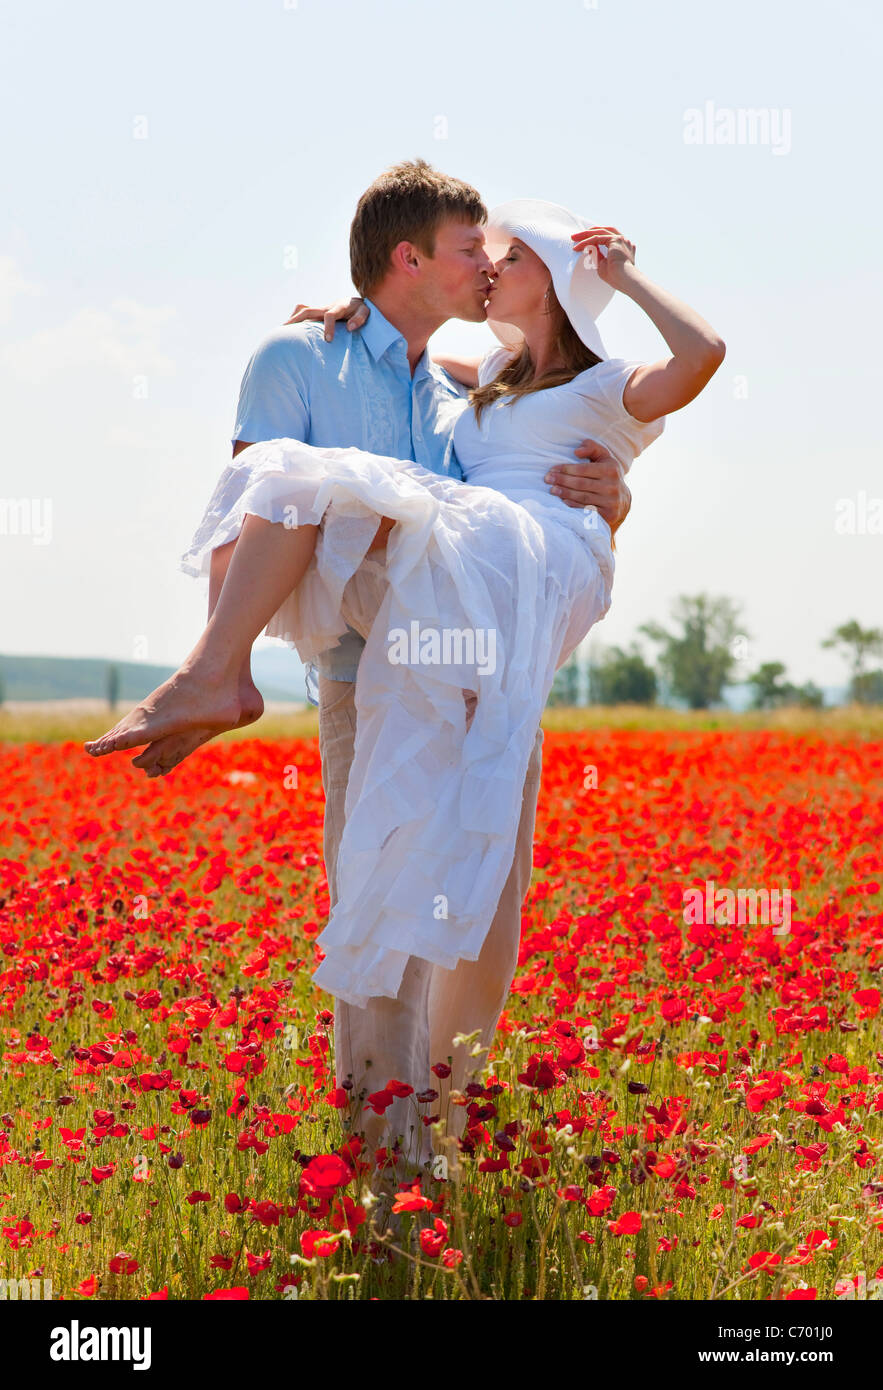 Couple kissing in field of poppies Stock Photo